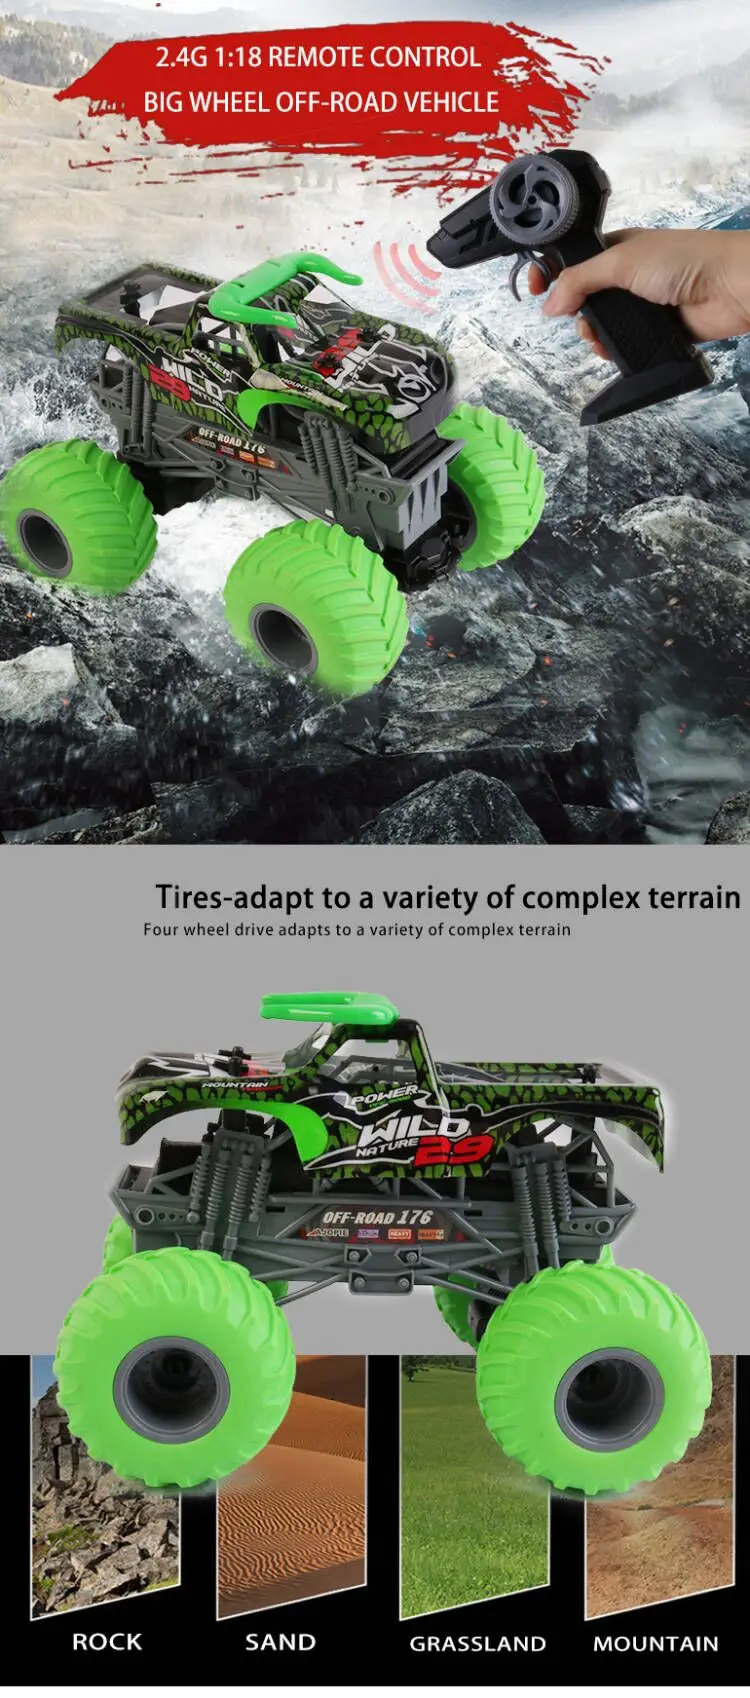 Oyuncak Children Toys Kids Electric Off Road RC Monster Buggy, China Car Toy Control Big Wheel RC Buggy Carro De Controle